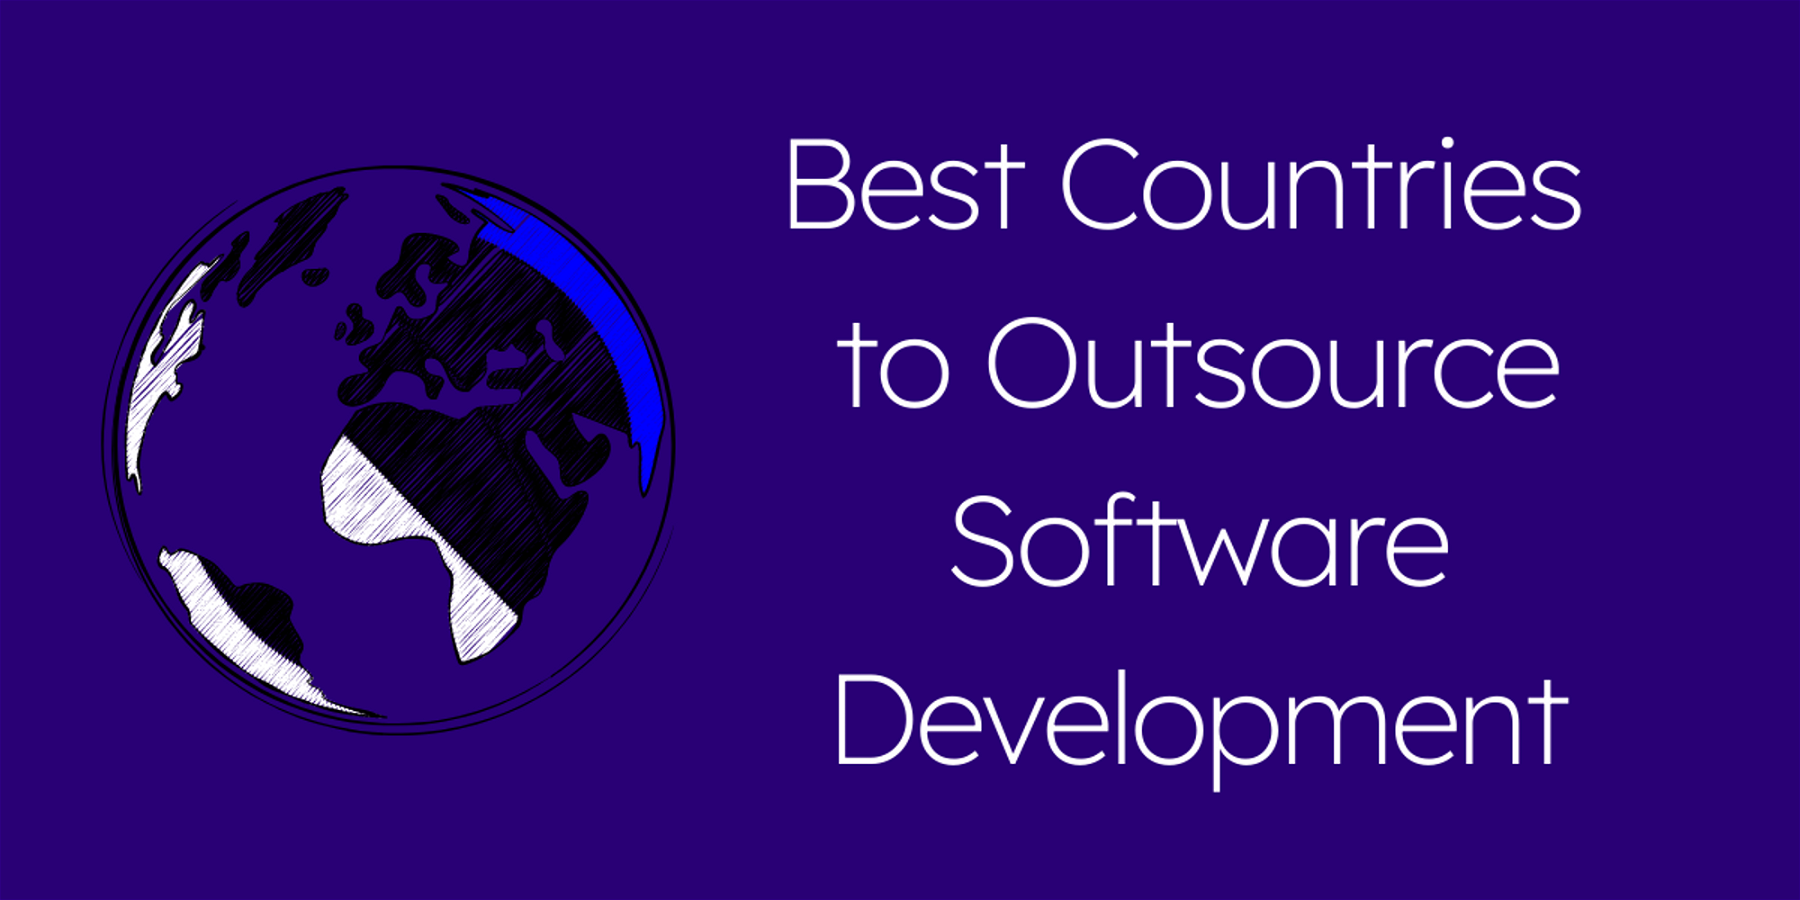 Best Countries To Outsource Software Development